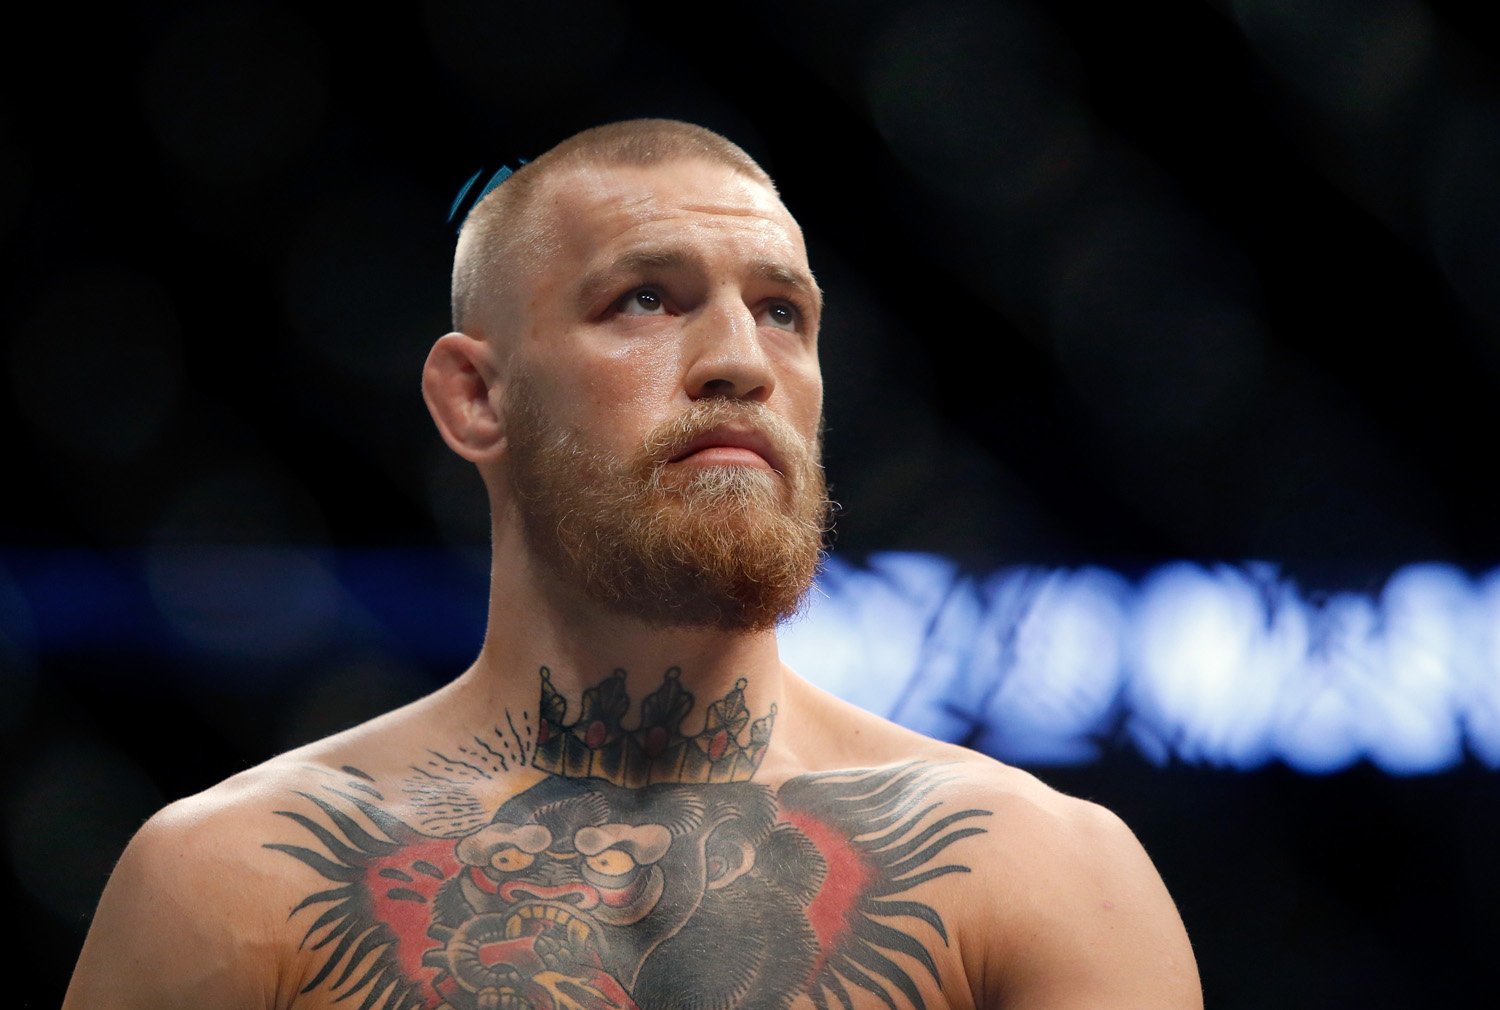 Conor McGregor responds to Jorge Masvidal fight proposition with adult joke